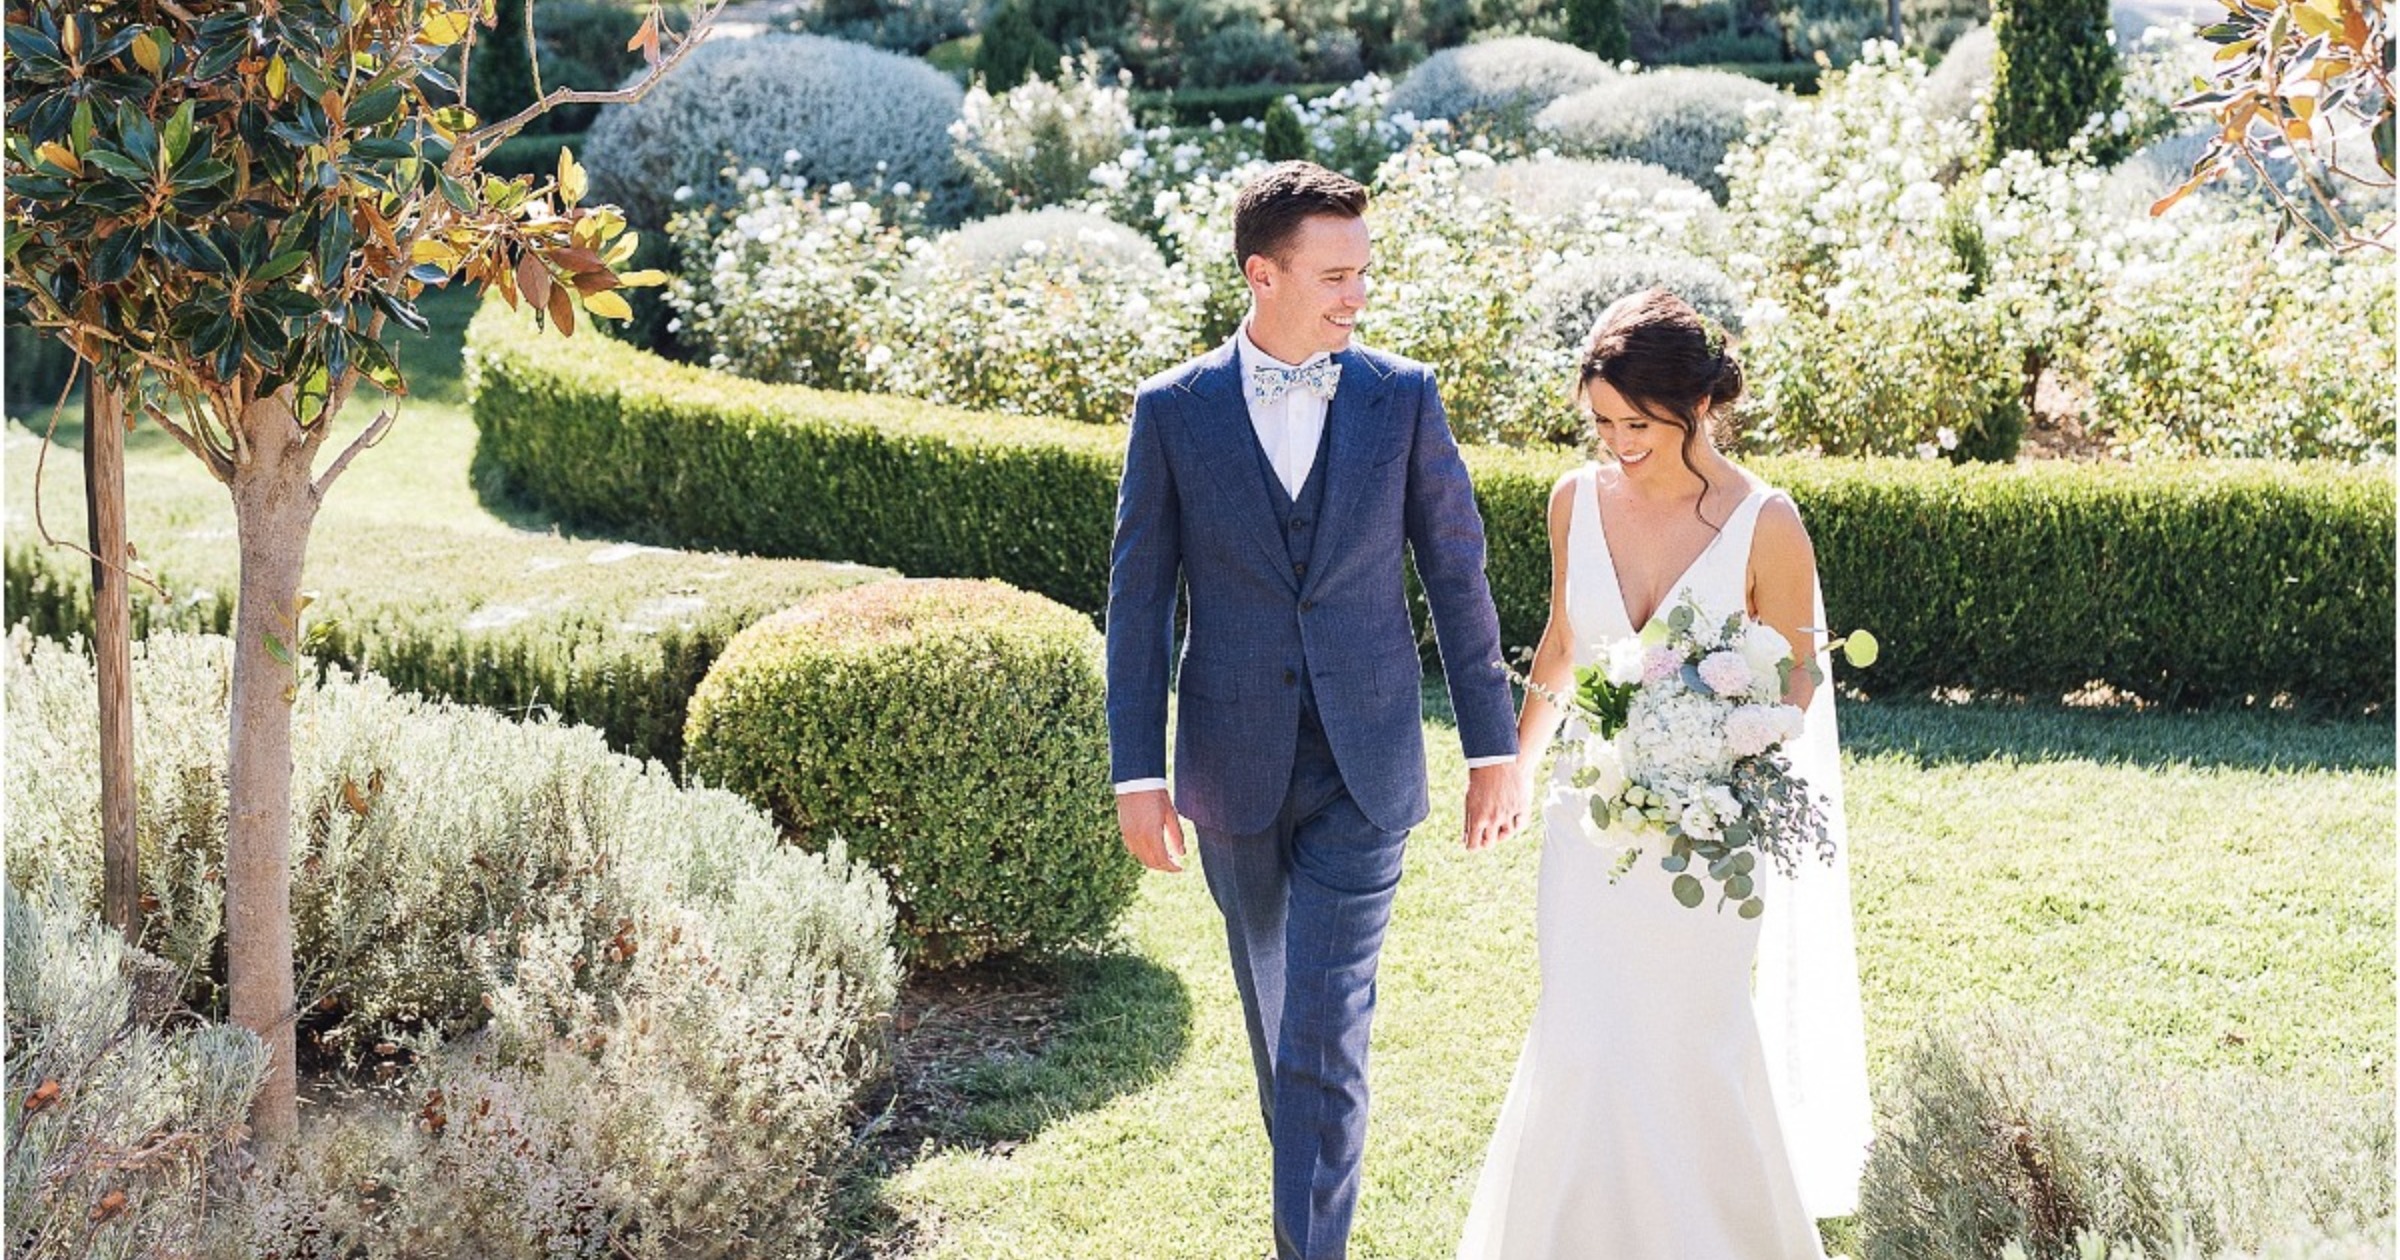 An intimate, blue & ivory wedding at Park Winters in California